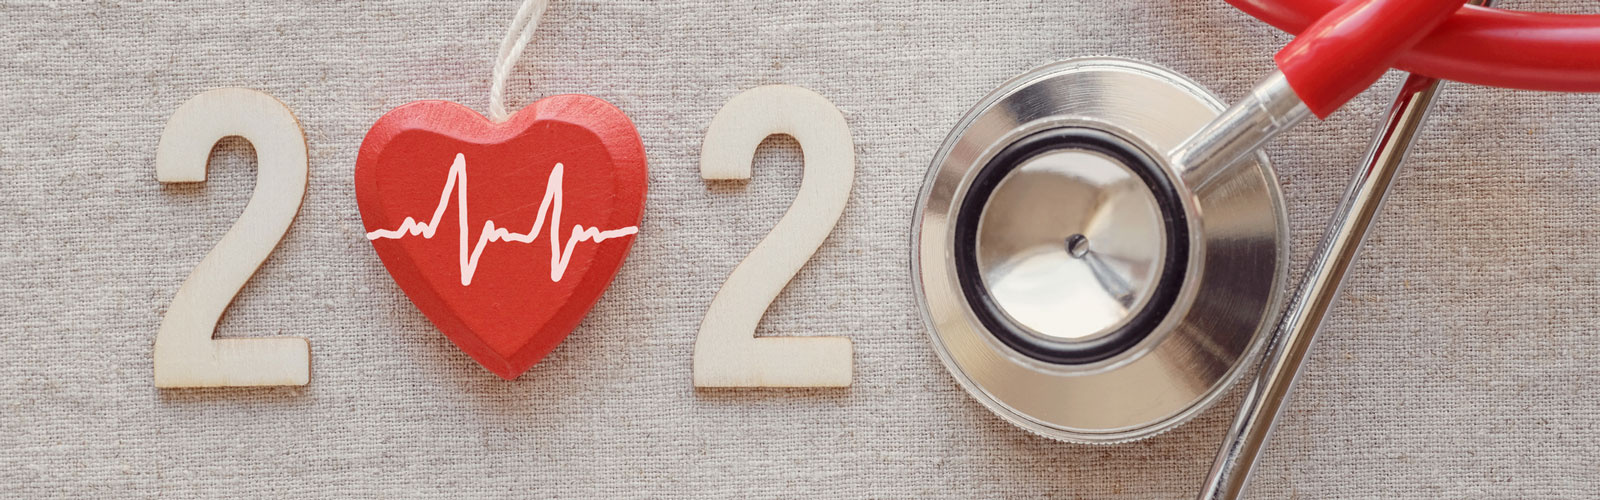 2020 wooden number with red stethoscope